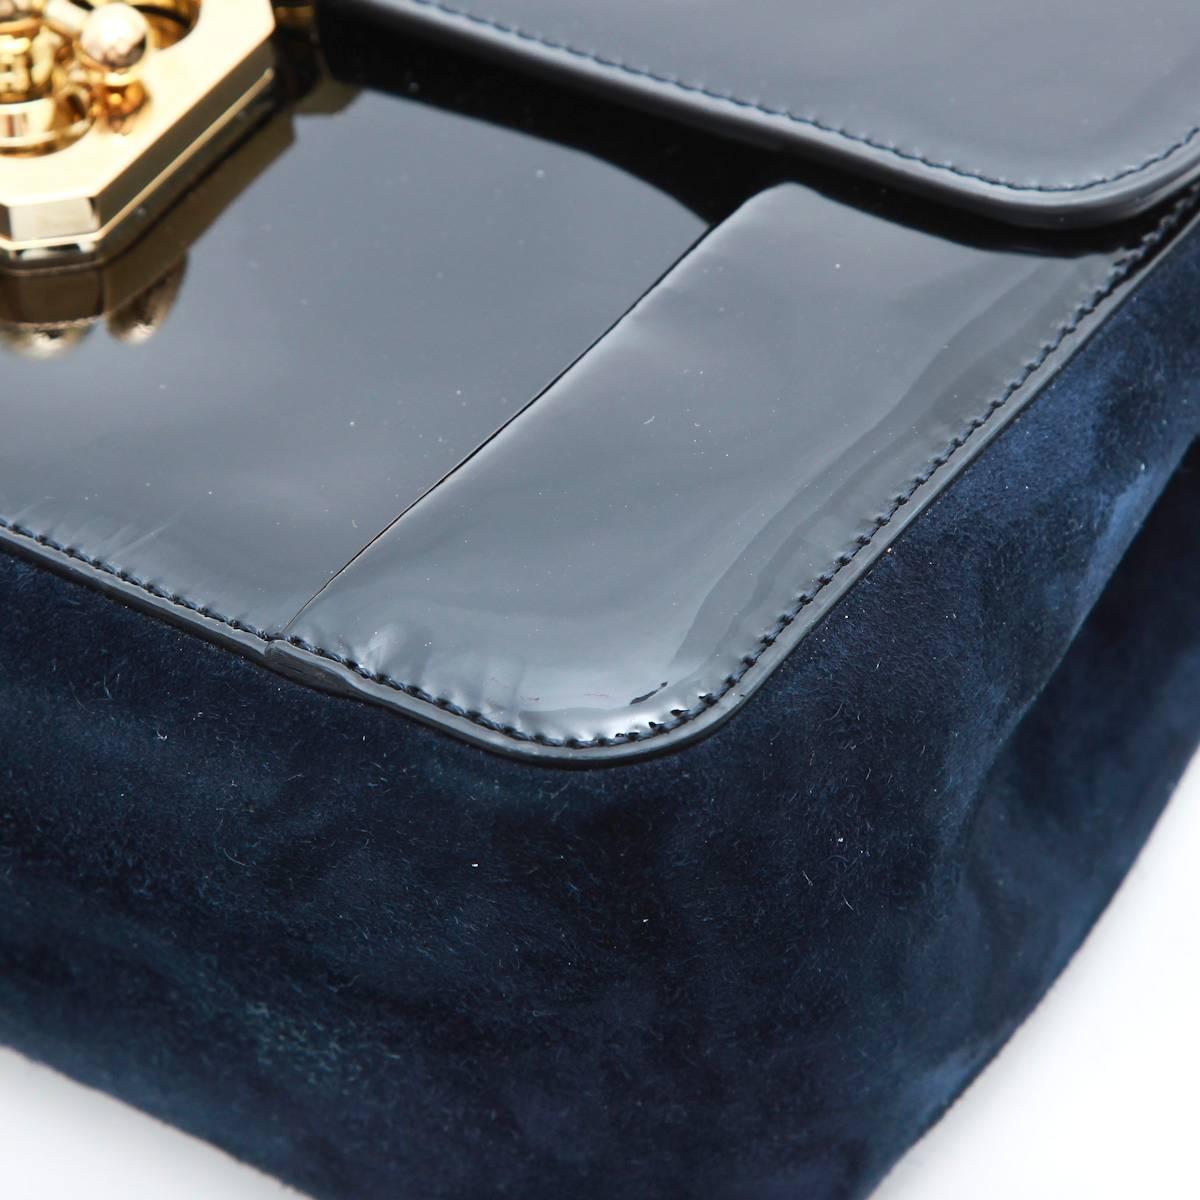 CHLOE Flap Bag in Navy Suede and Black Patent Leather 6